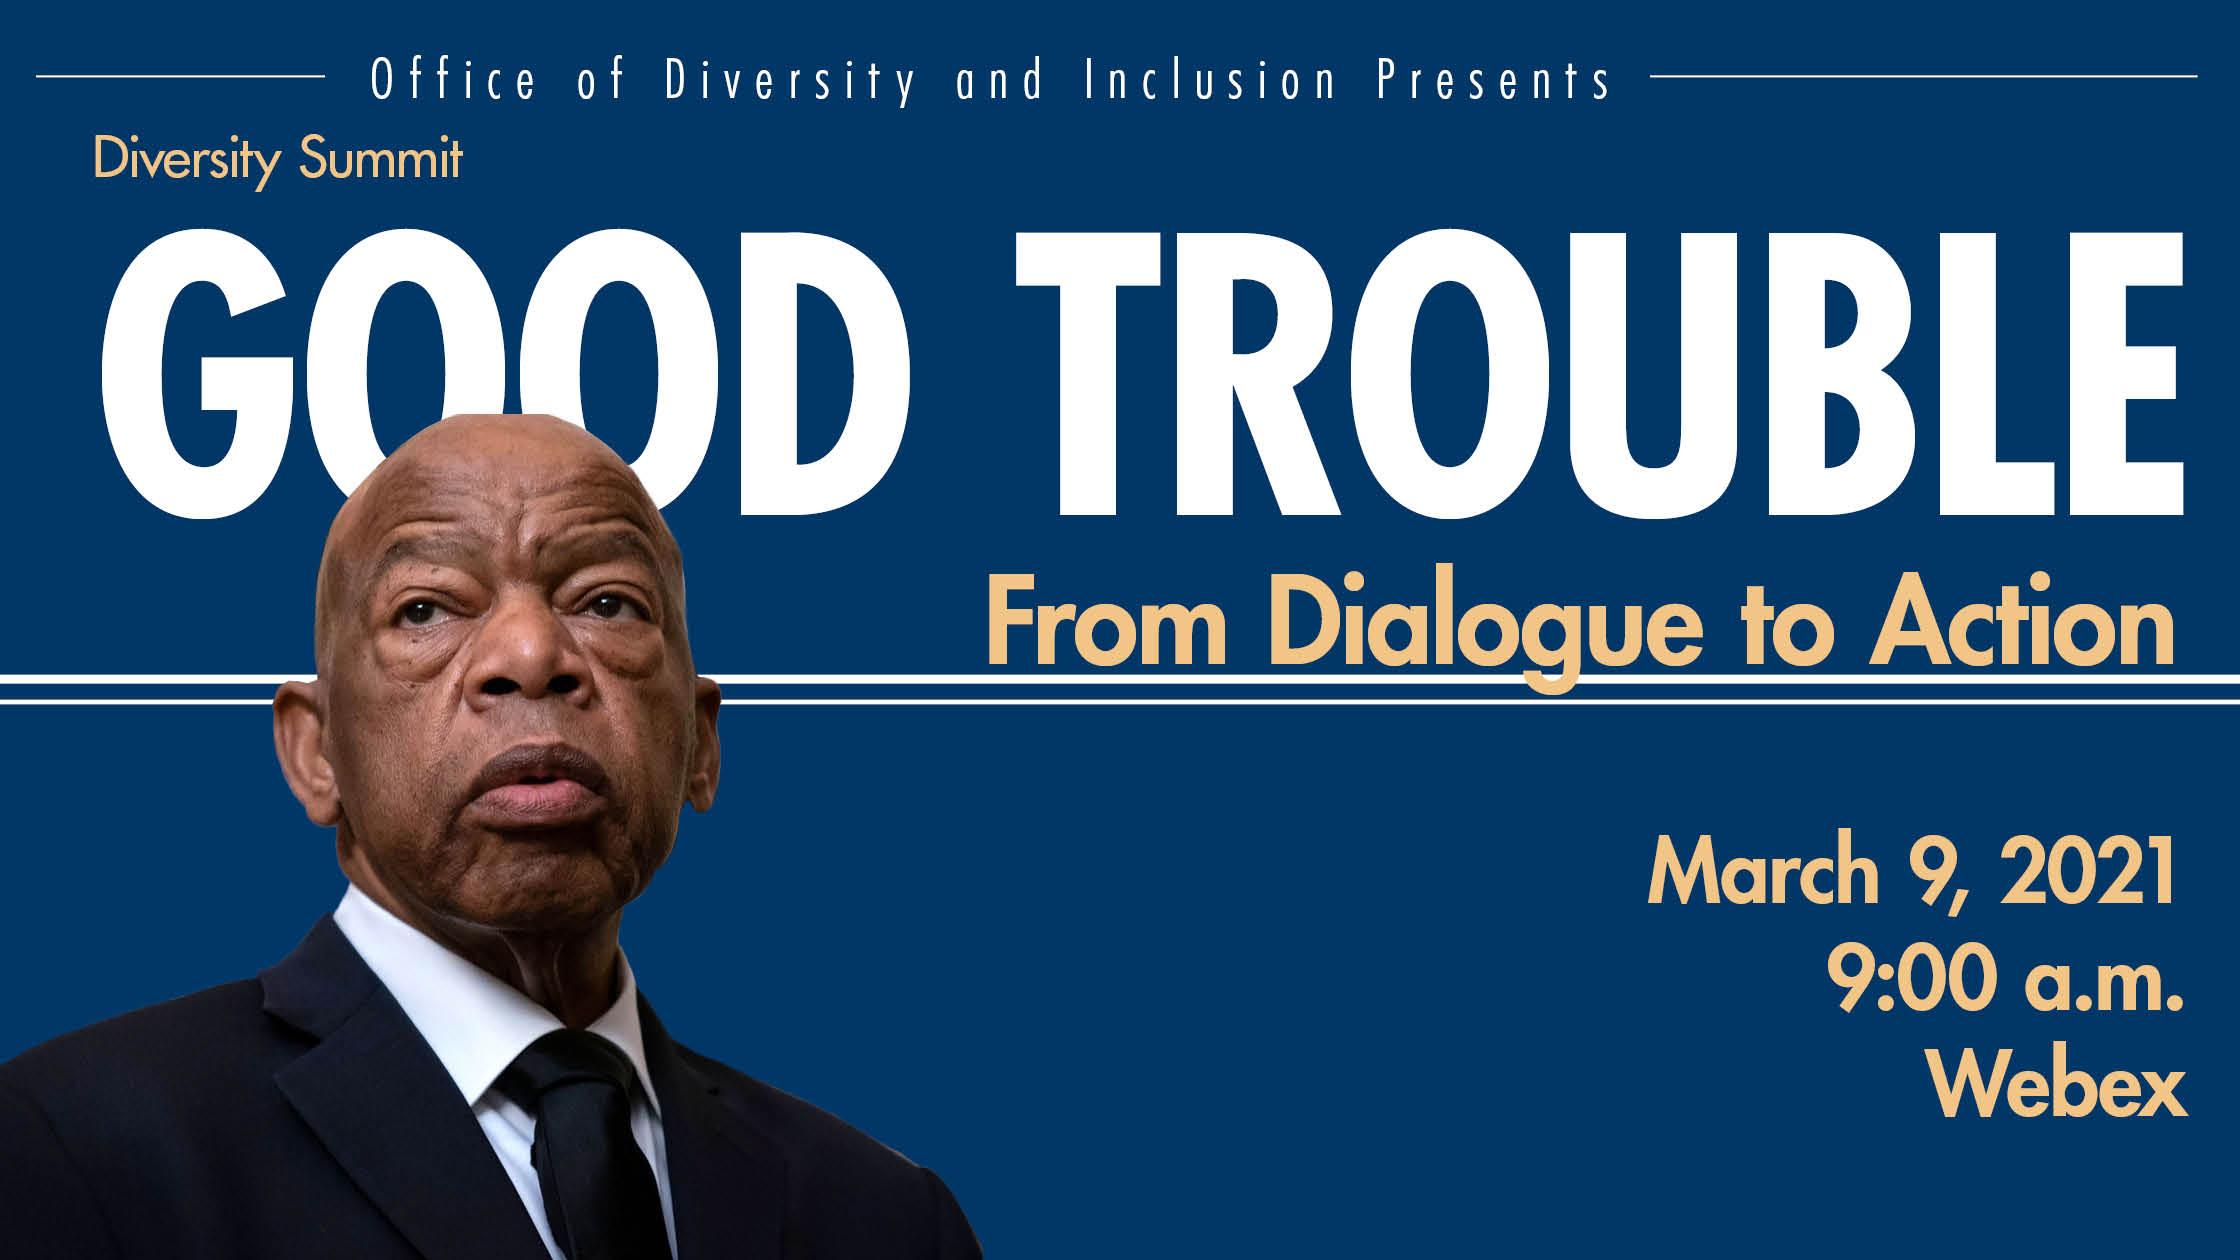 Diversity Summit 2021 -- Good Trouble: From Dialogue to Action